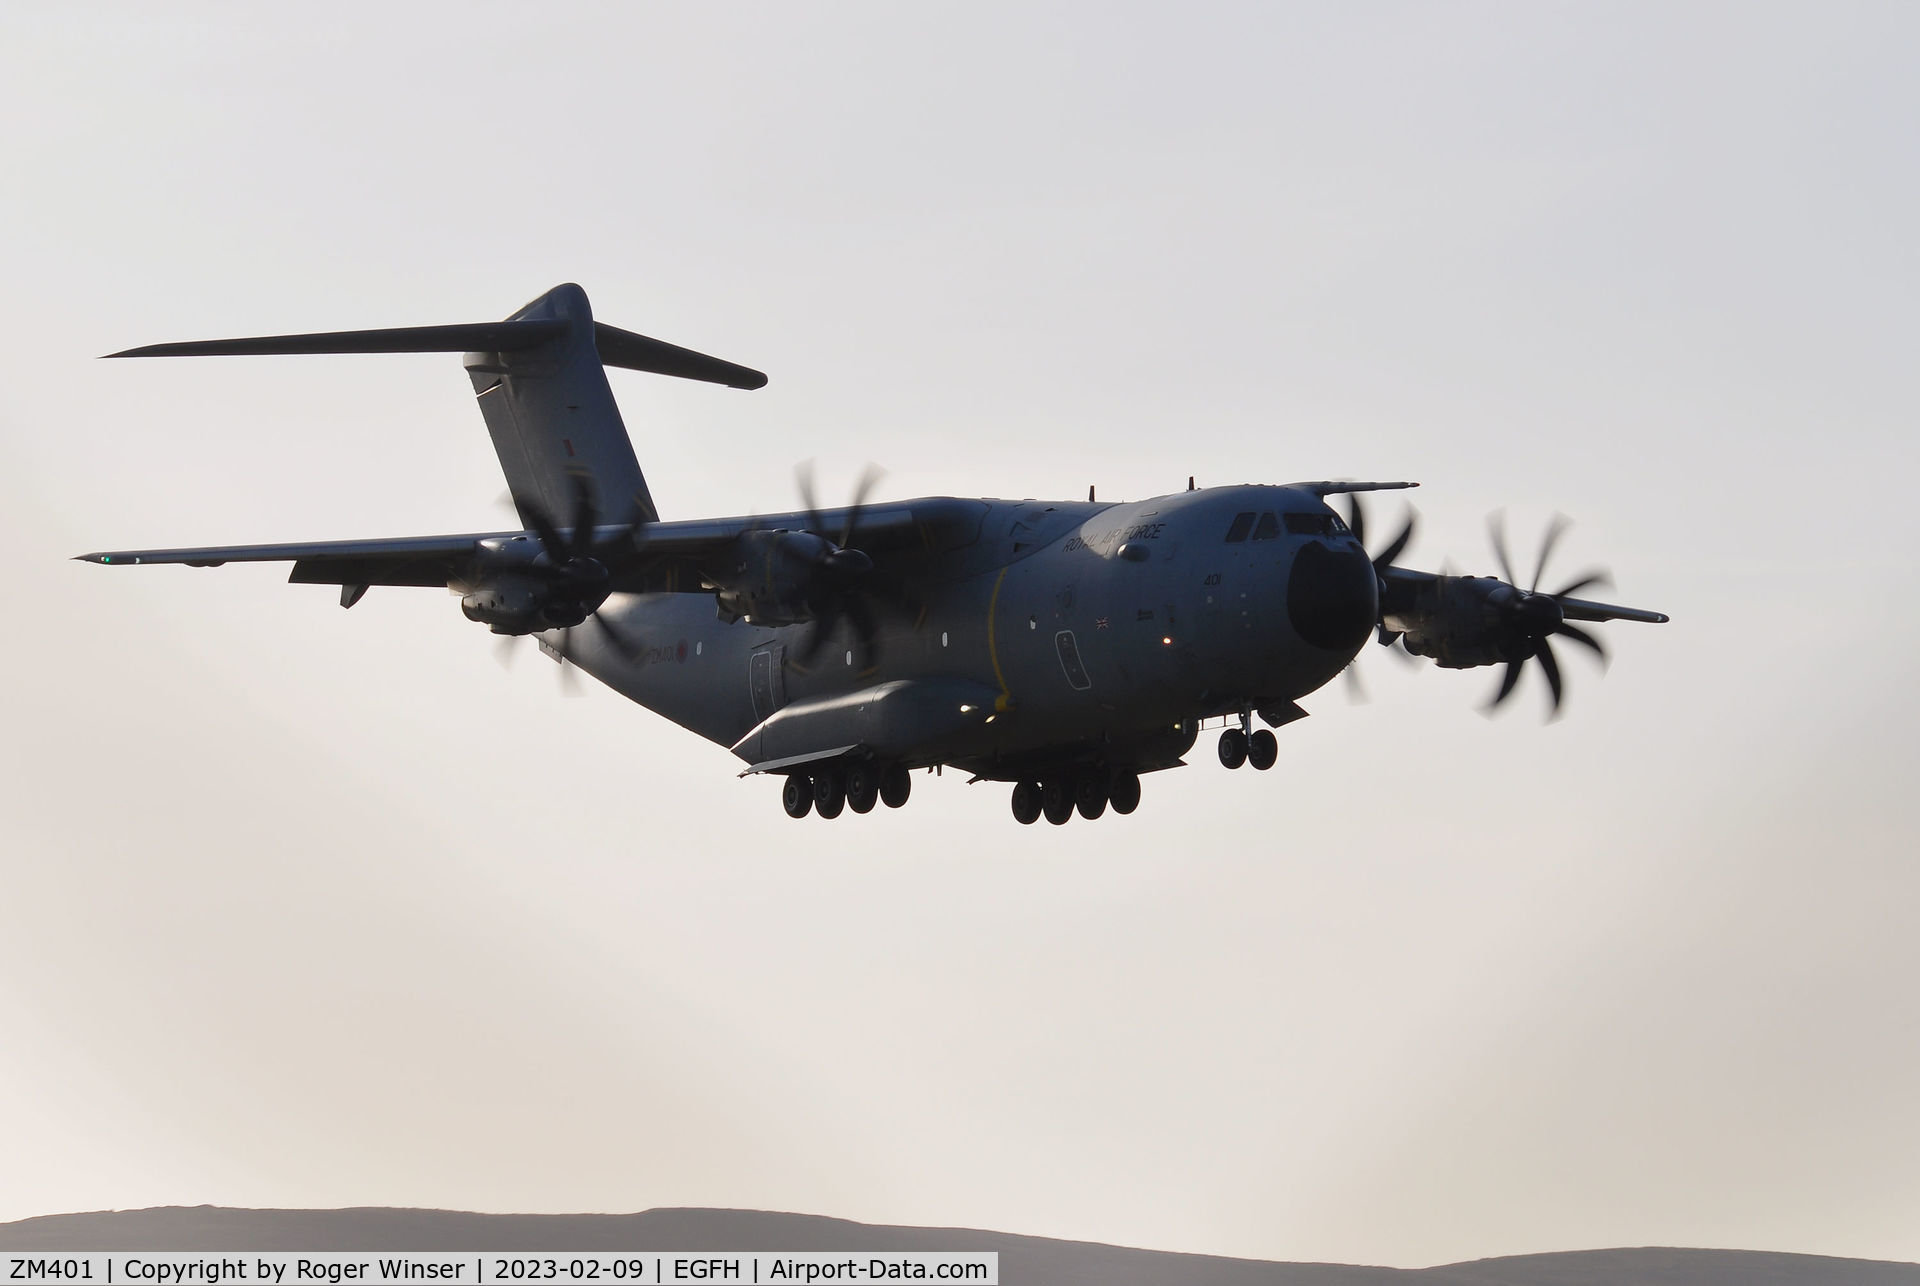 ZM401, 2014 Airbus A400M-180 Atlas C.1 C/N 016, RAF Atlas C.1 aircraft making a low pass over Runway 04.